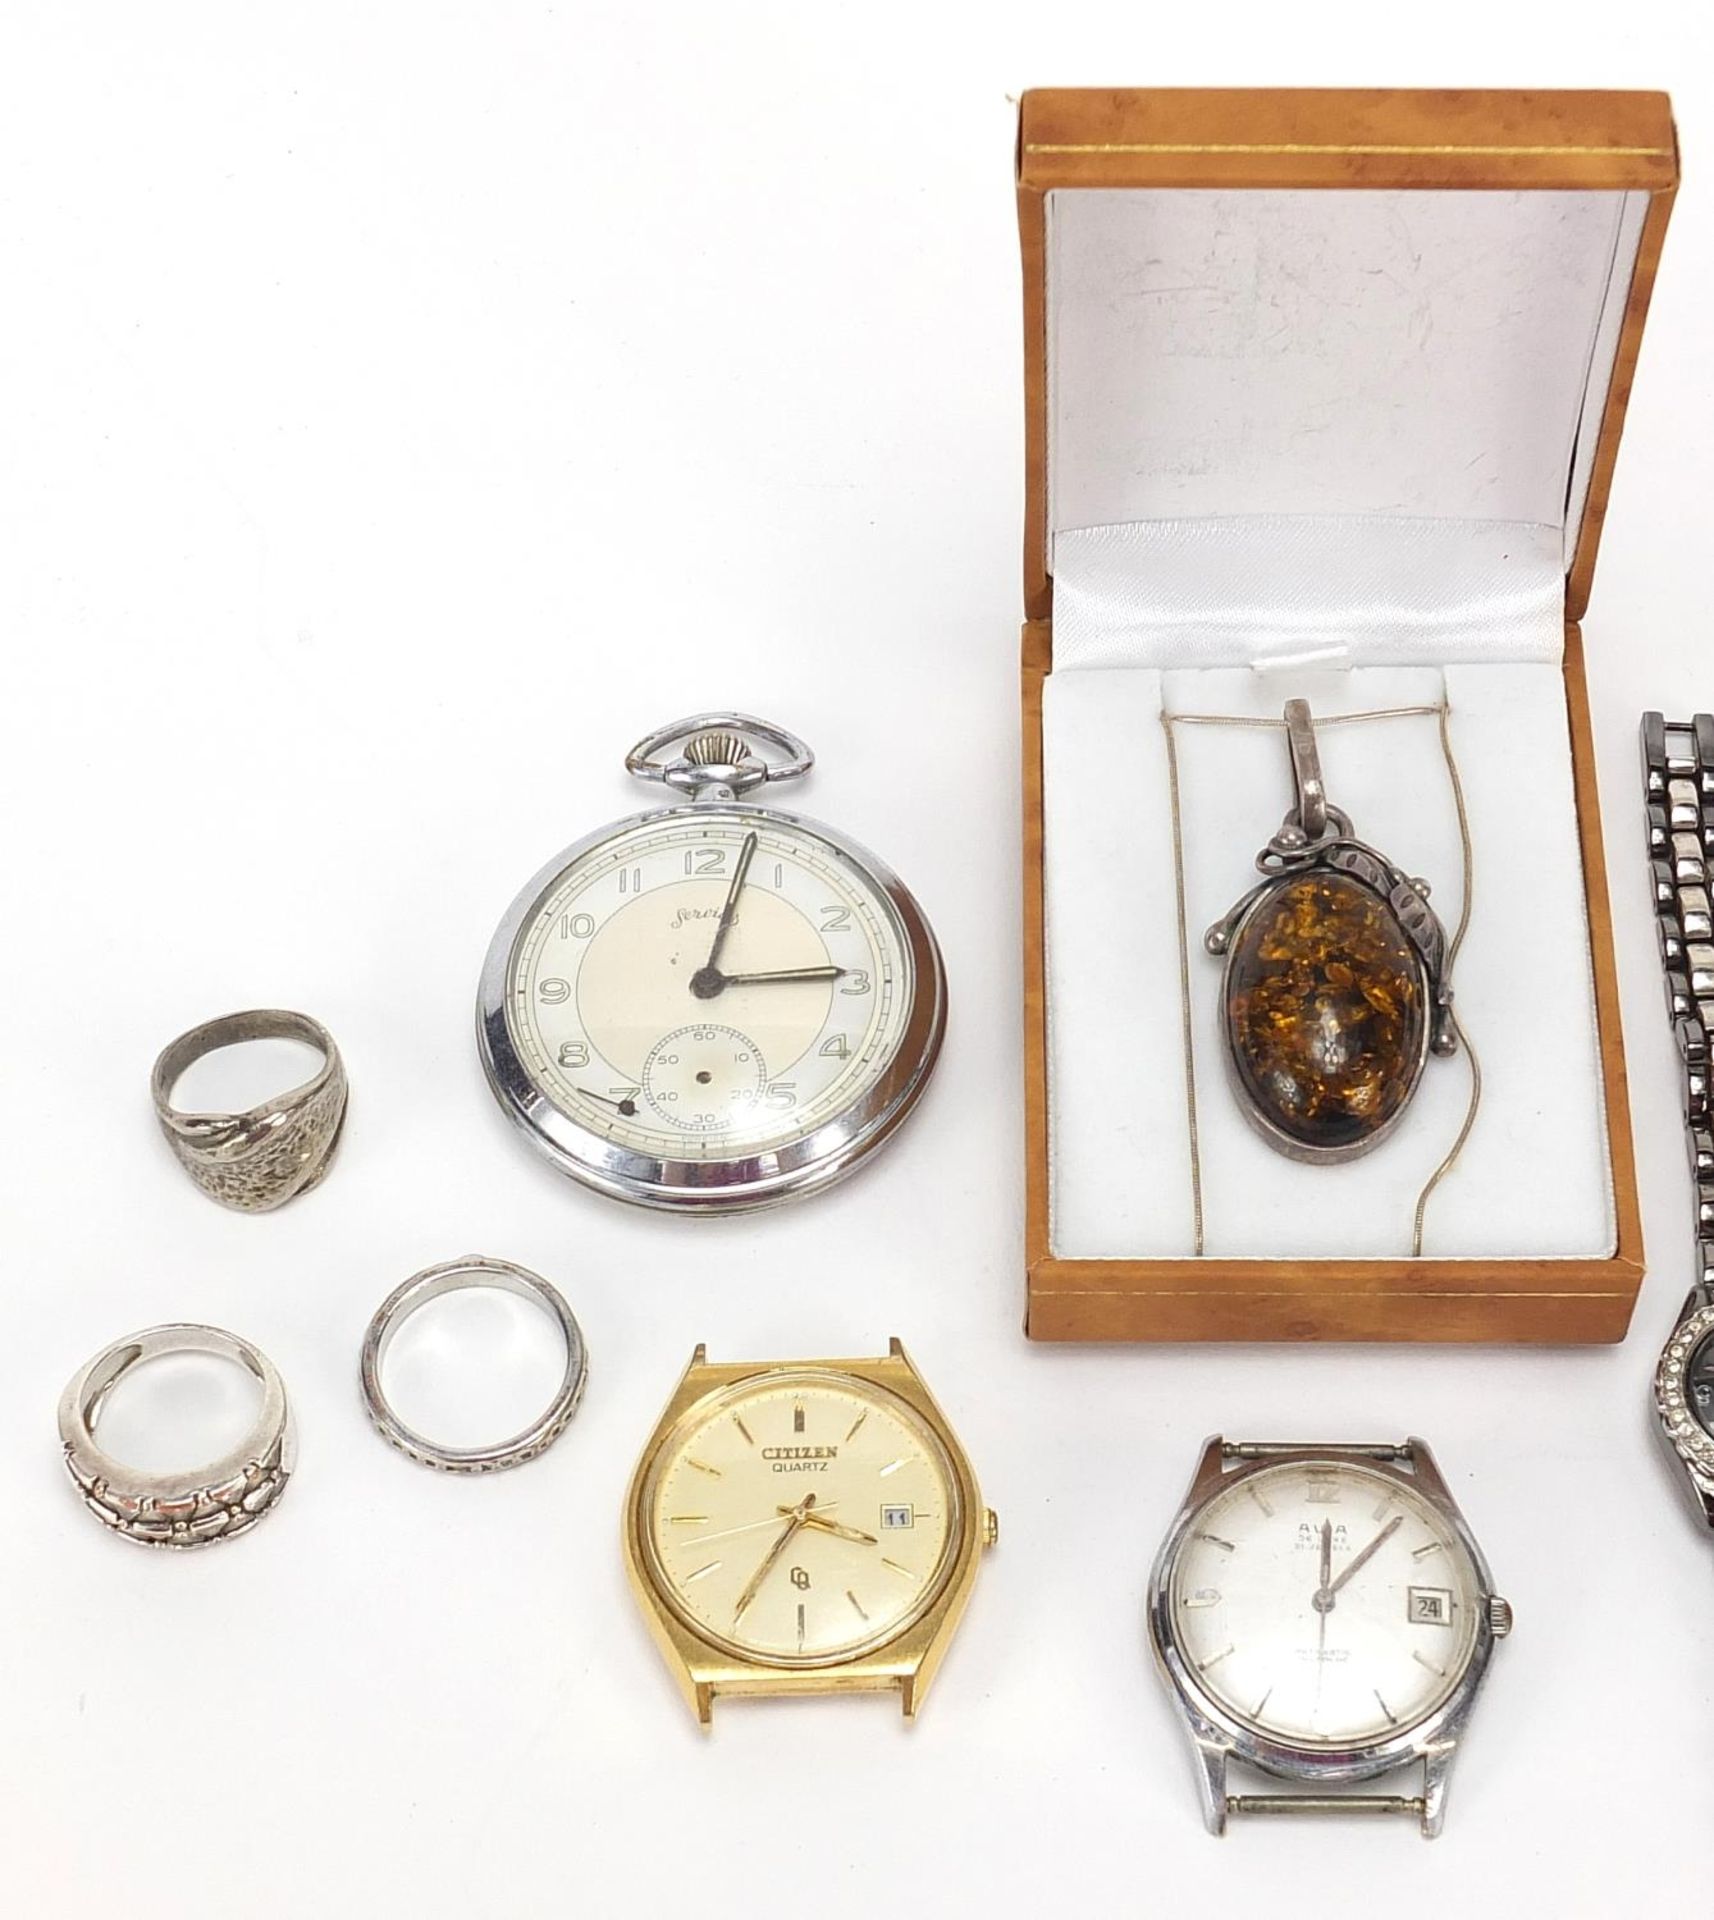 Vintage and later jewellery including silver rings, silver and amber pendant, vintage wristwatches - Image 2 of 4